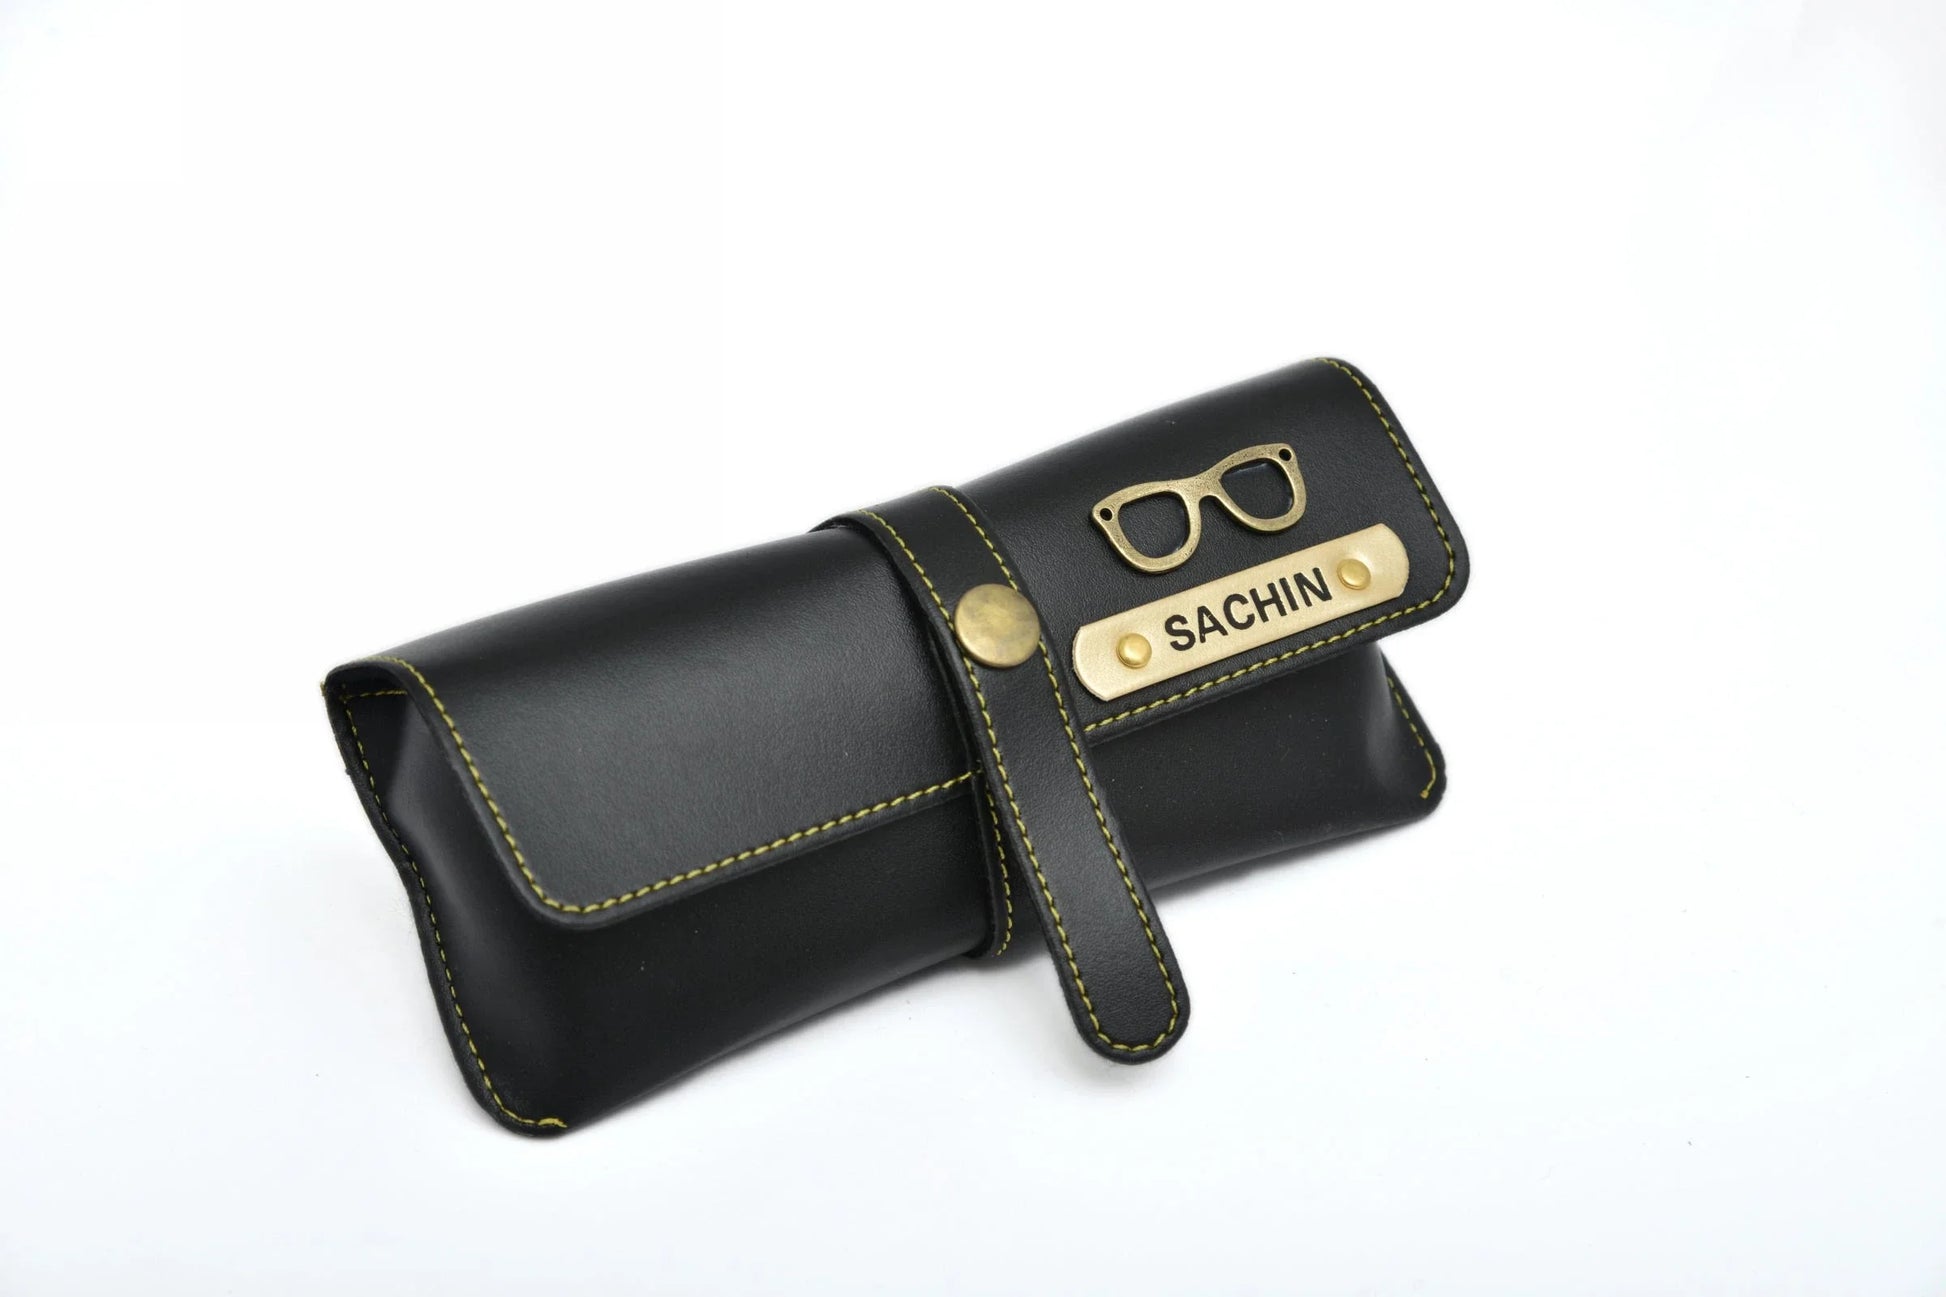 Keep your eyewear clean and secure with our easy-to-use and convenient eyewear case.